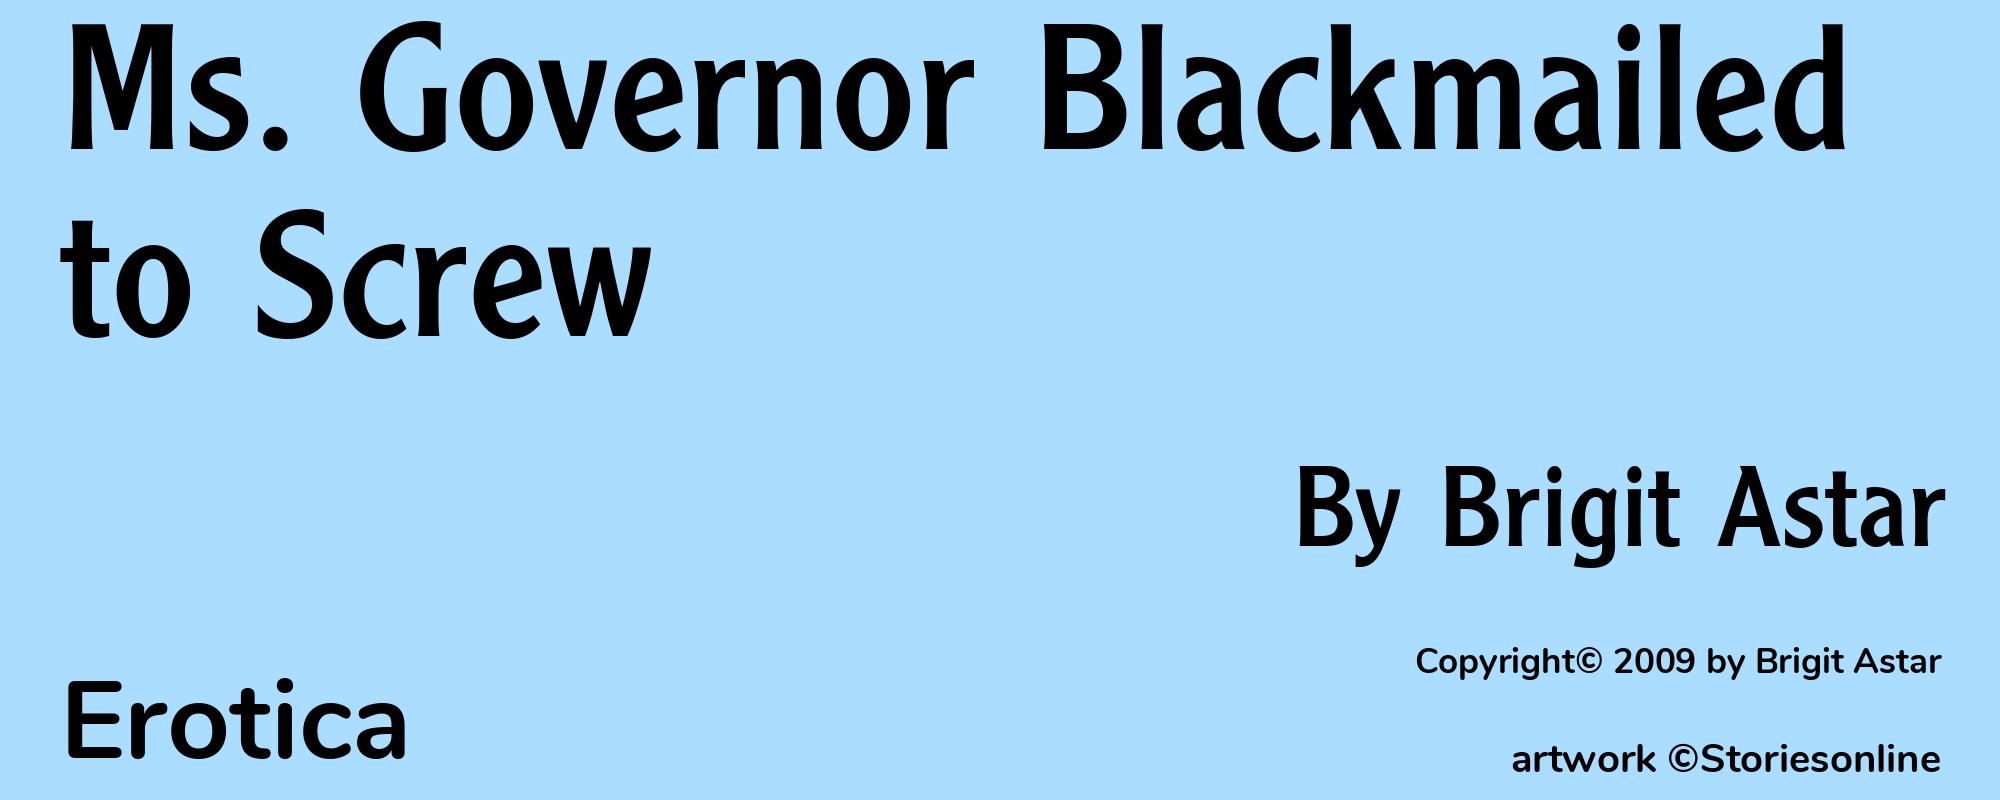 Ms. Governor Blackmailed to Screw - Cover